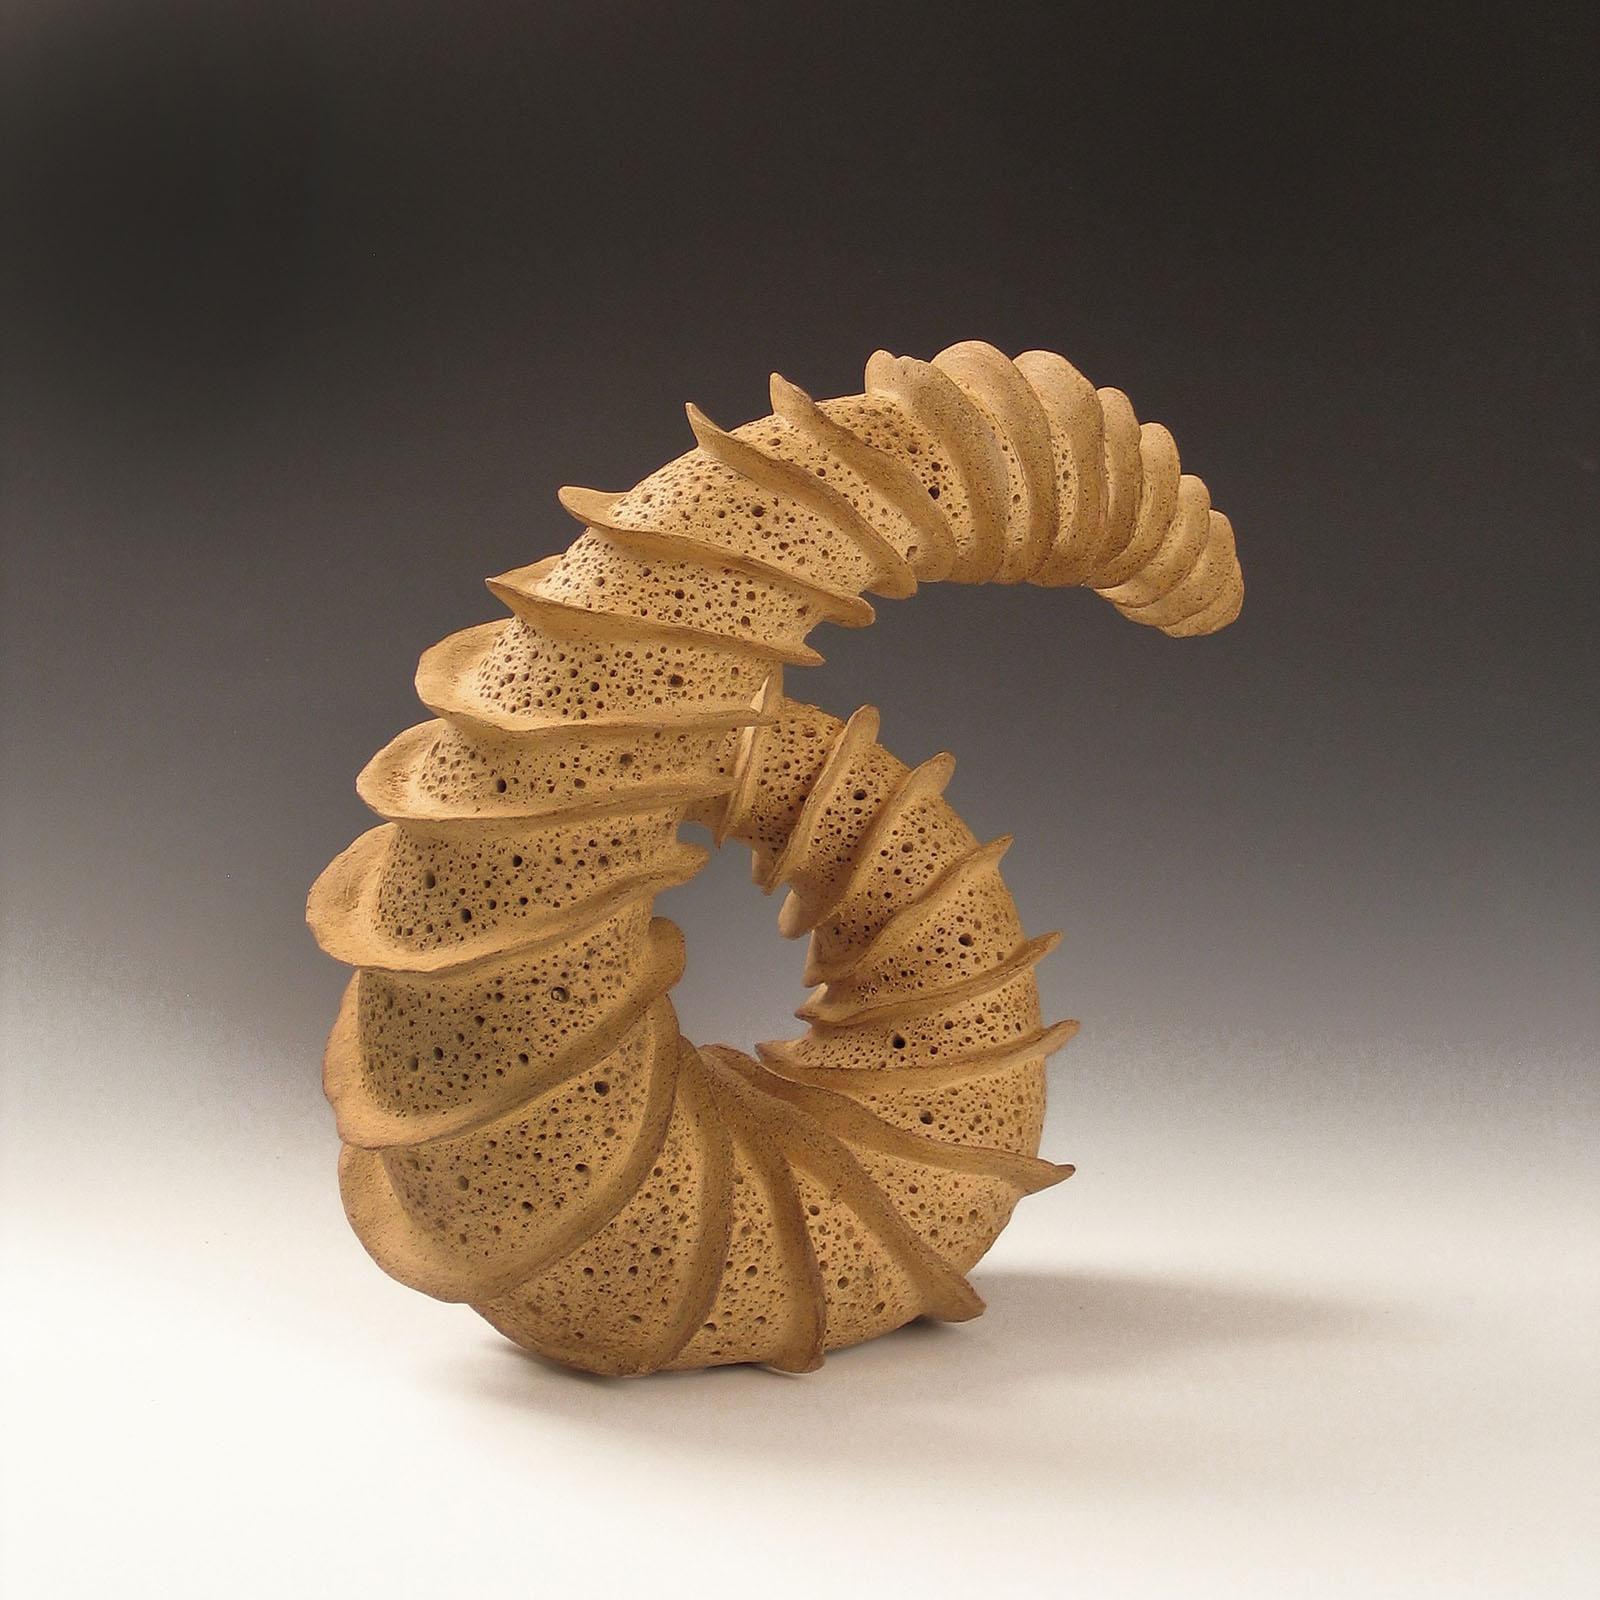  “Looking Back”,  radiates fins spiraling around a tapering coiled ceramic form - Abstract Sculpture by Elaine Lorenz